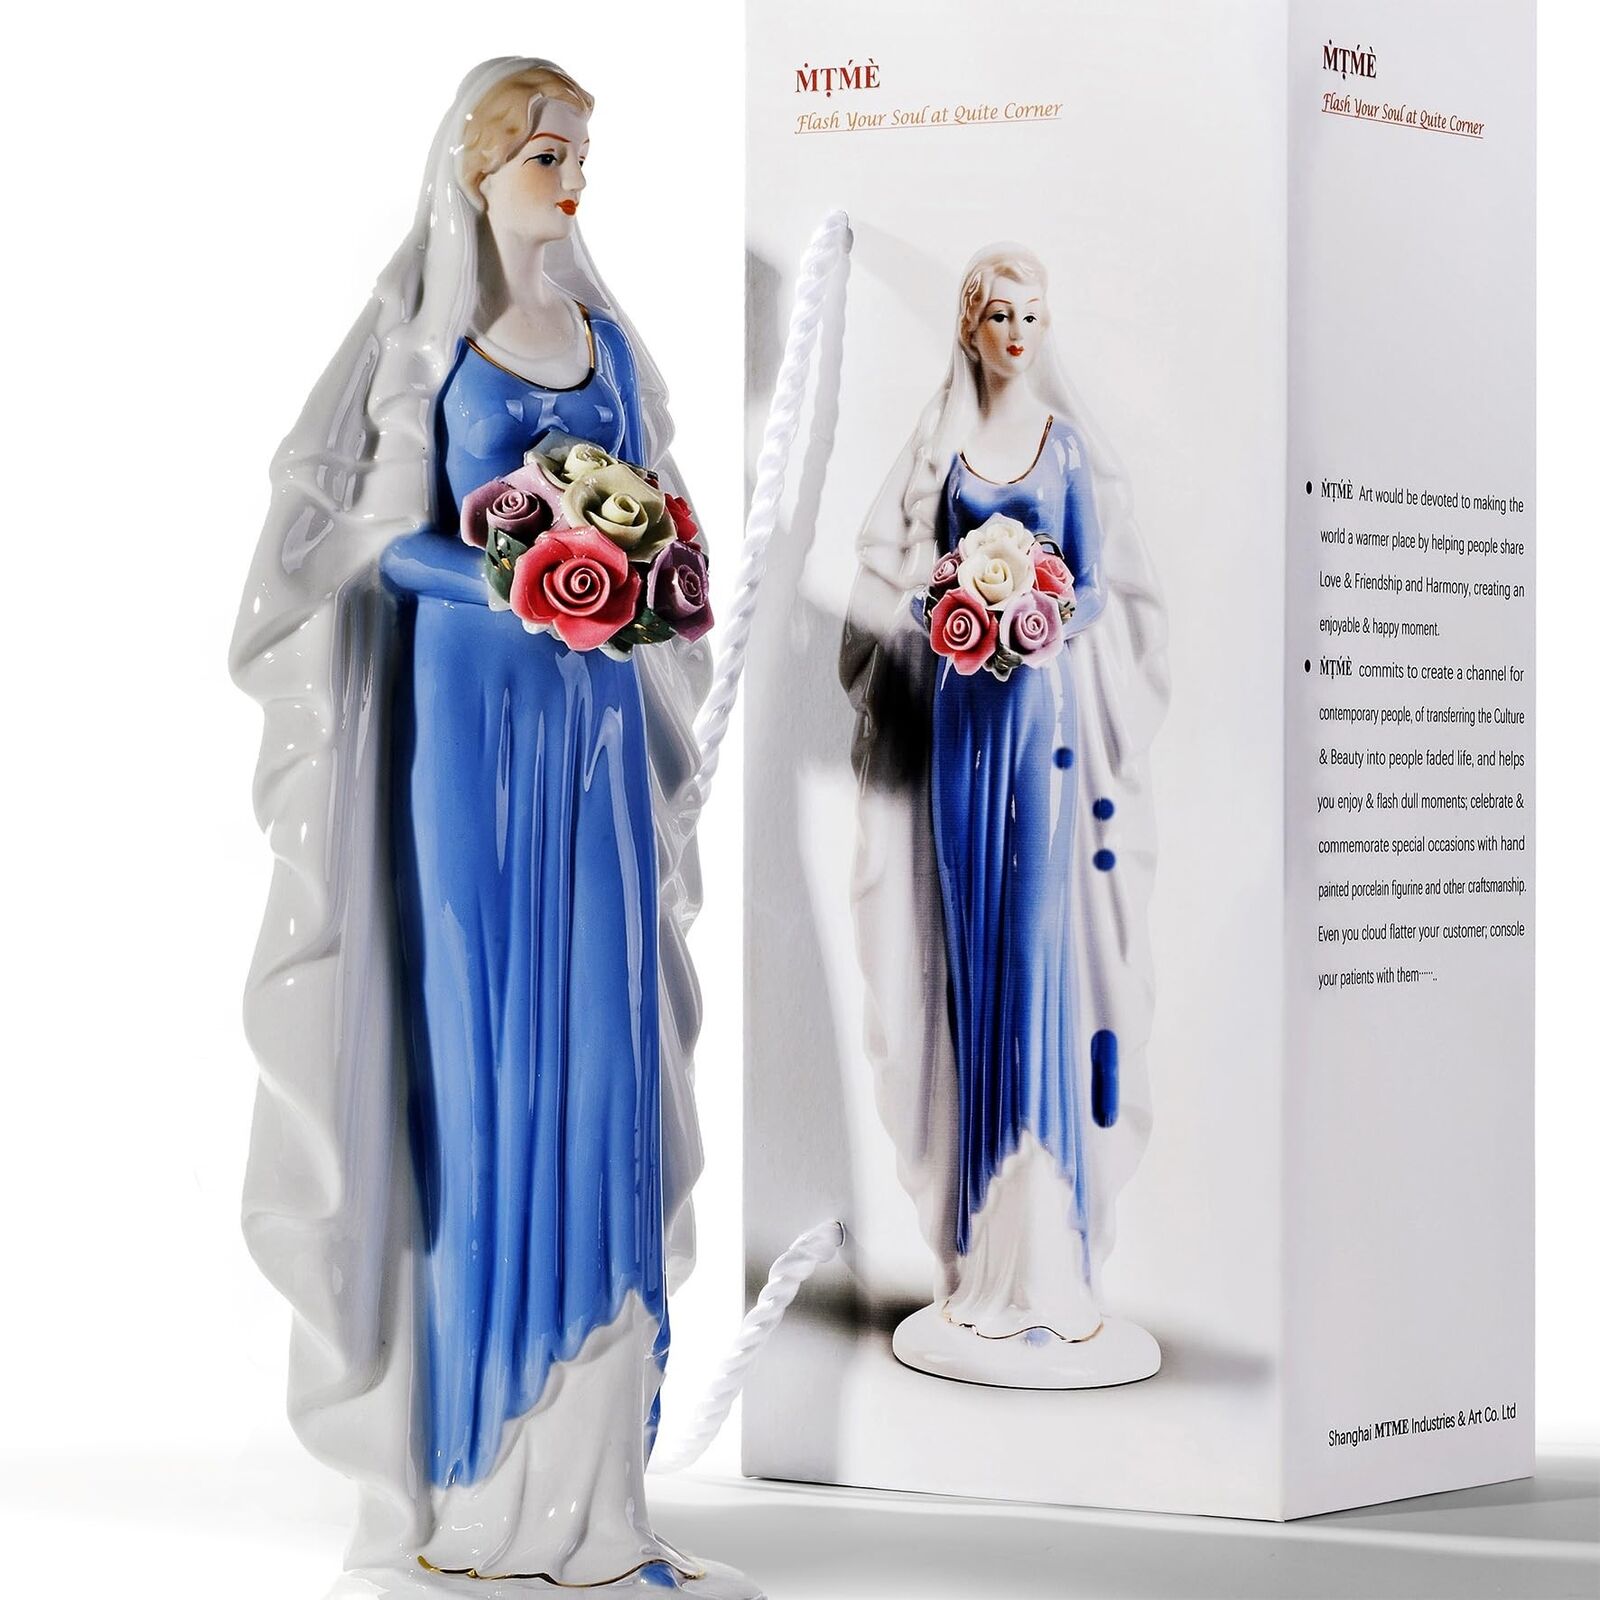 MTME Porcelain Figurines, The Most Beautiful Day, Wedding Gifts, Memorabilia,...